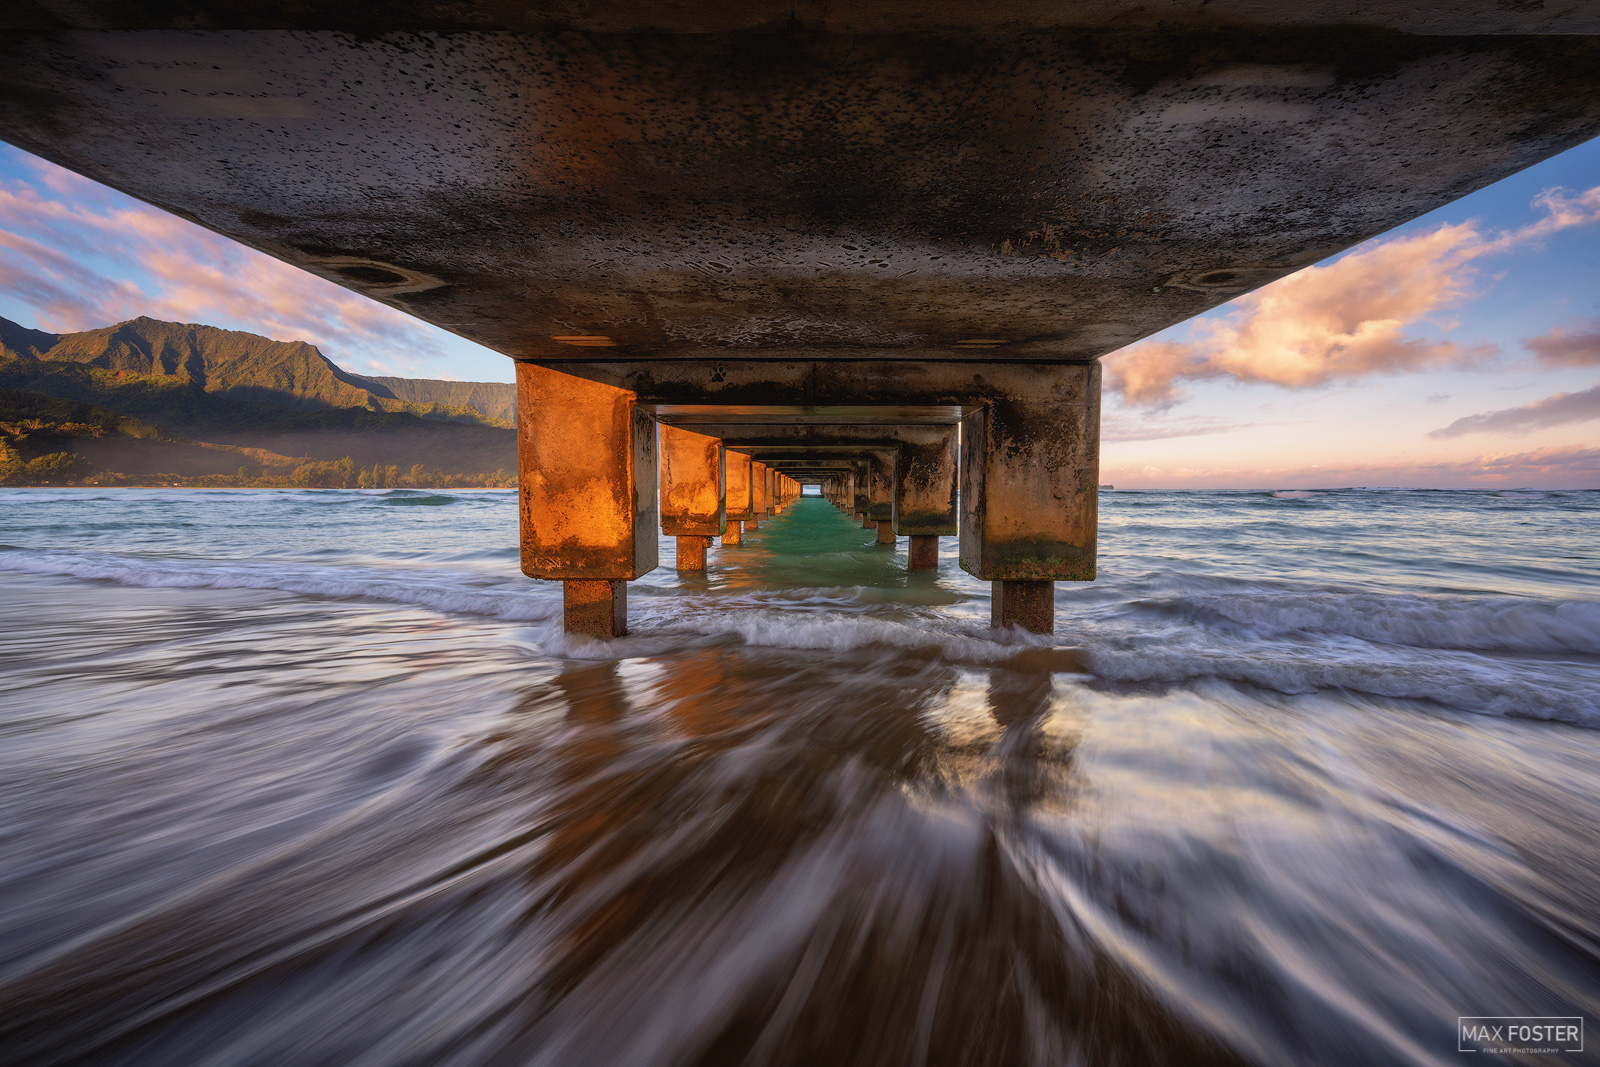 Elevate your space with Understudy, Max Foster's limited edition photography print of the Hanalei Bay Pier, Kauai from his Hawaii...